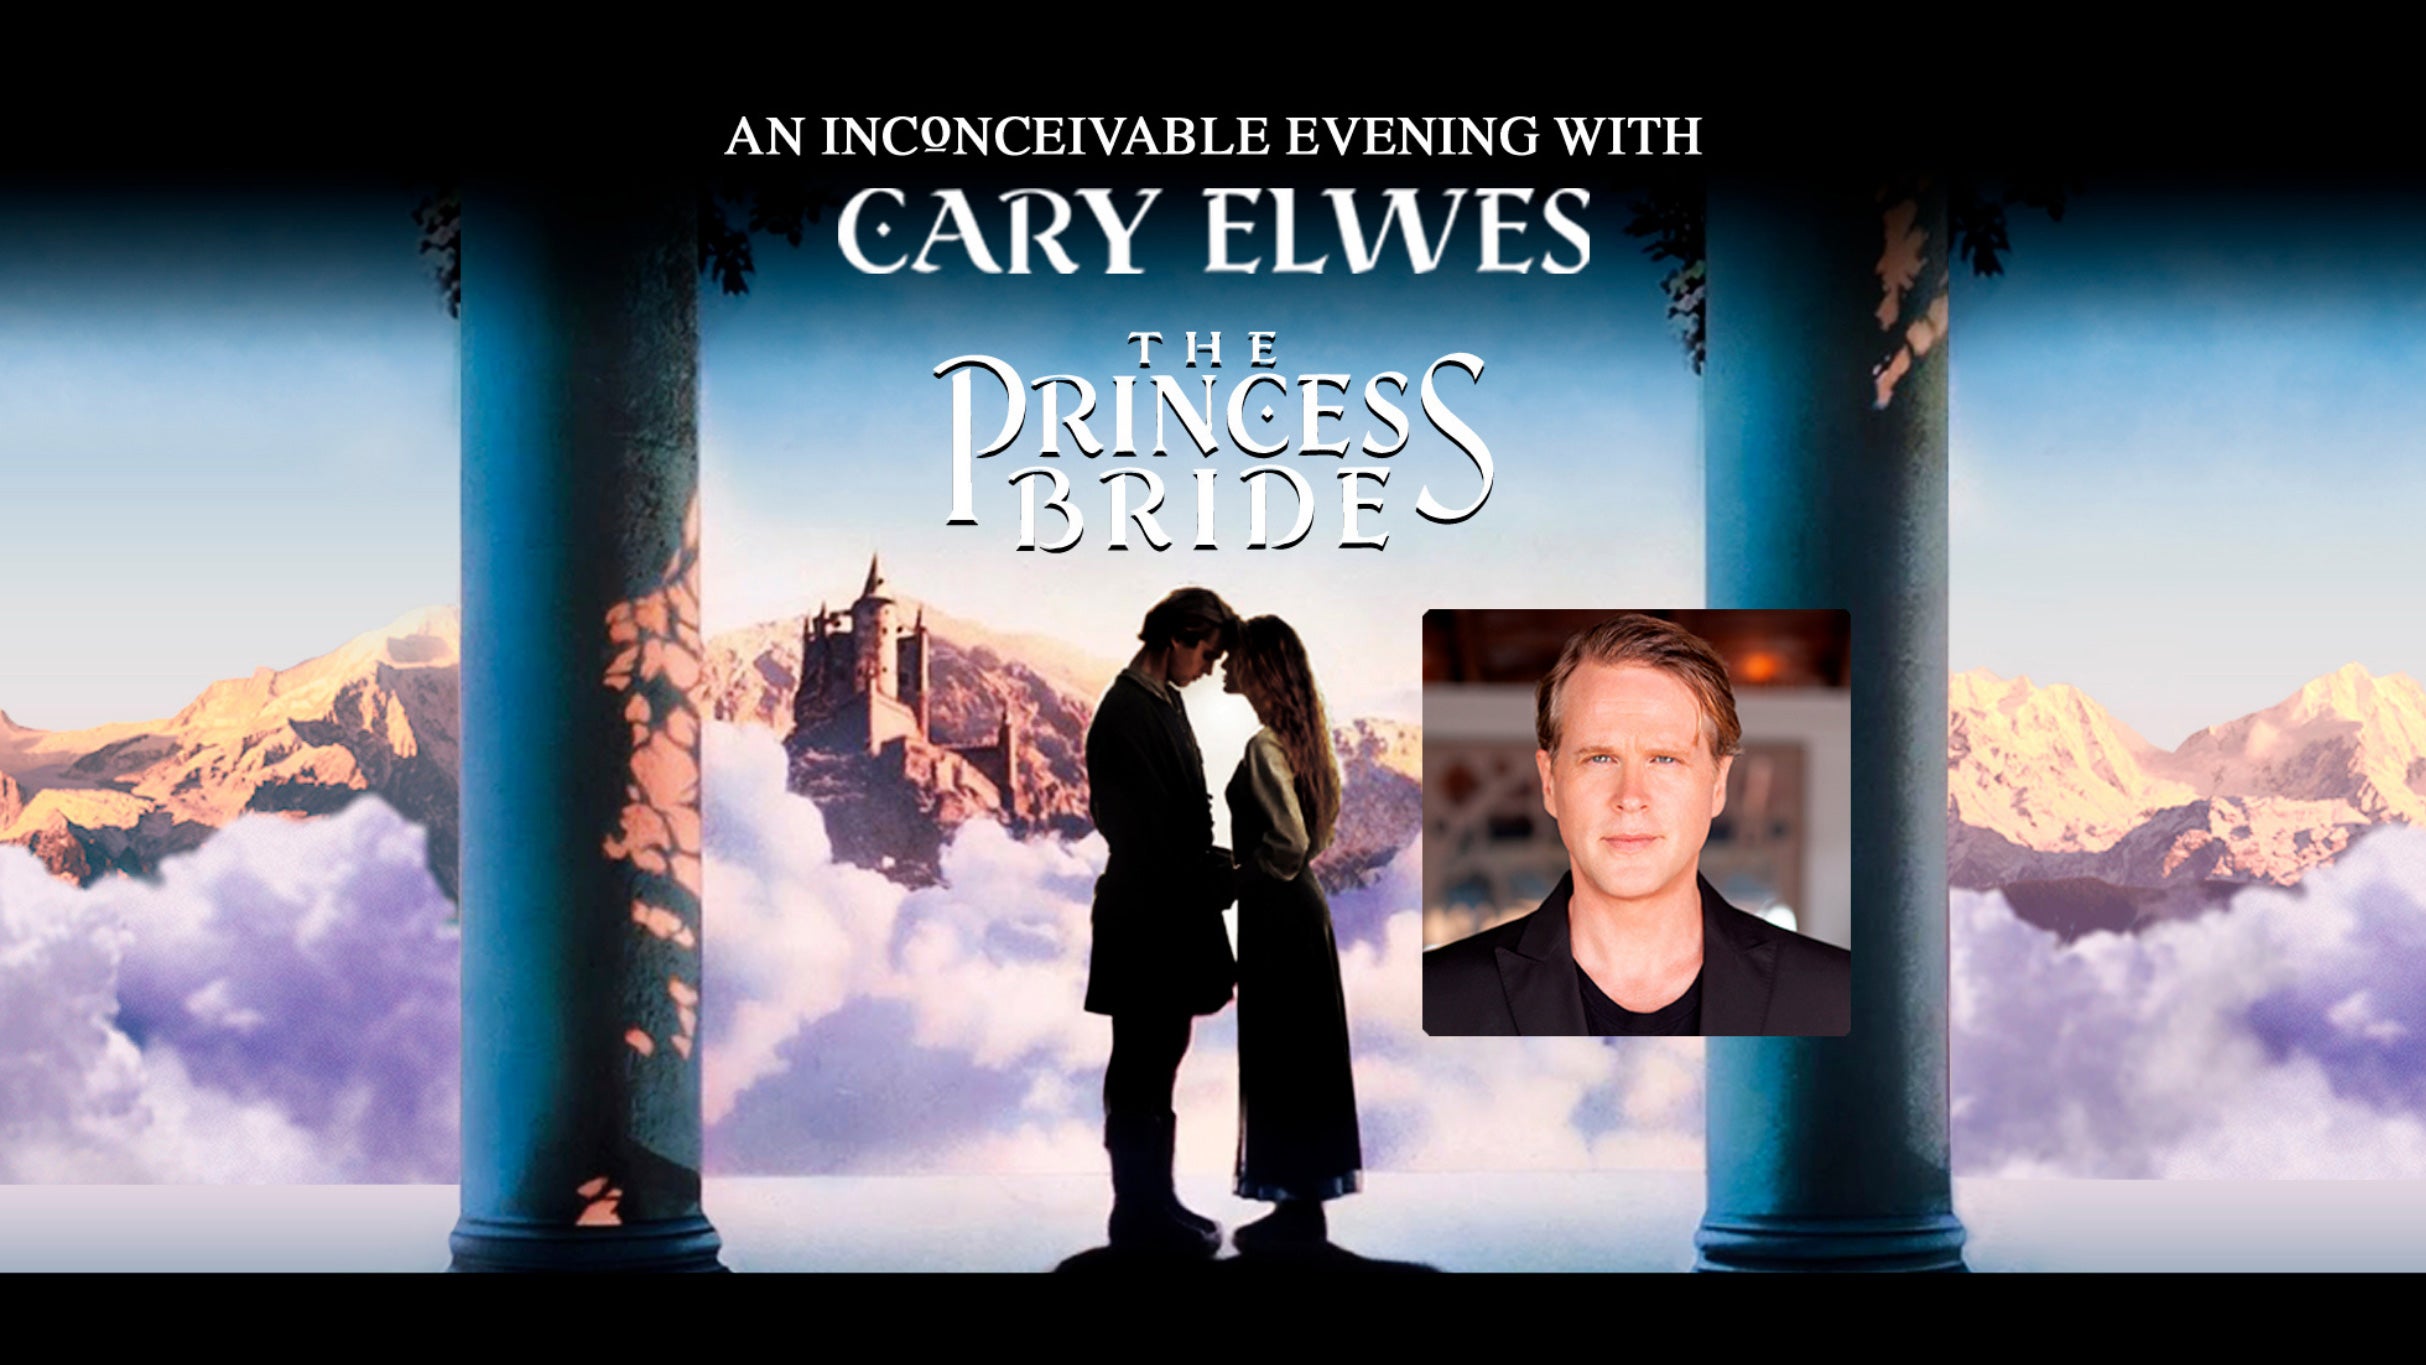 The Princess Bride: An Inconceivable Evening with Cary Elwes in Joliet promo photo for Official Platinum presale offer code